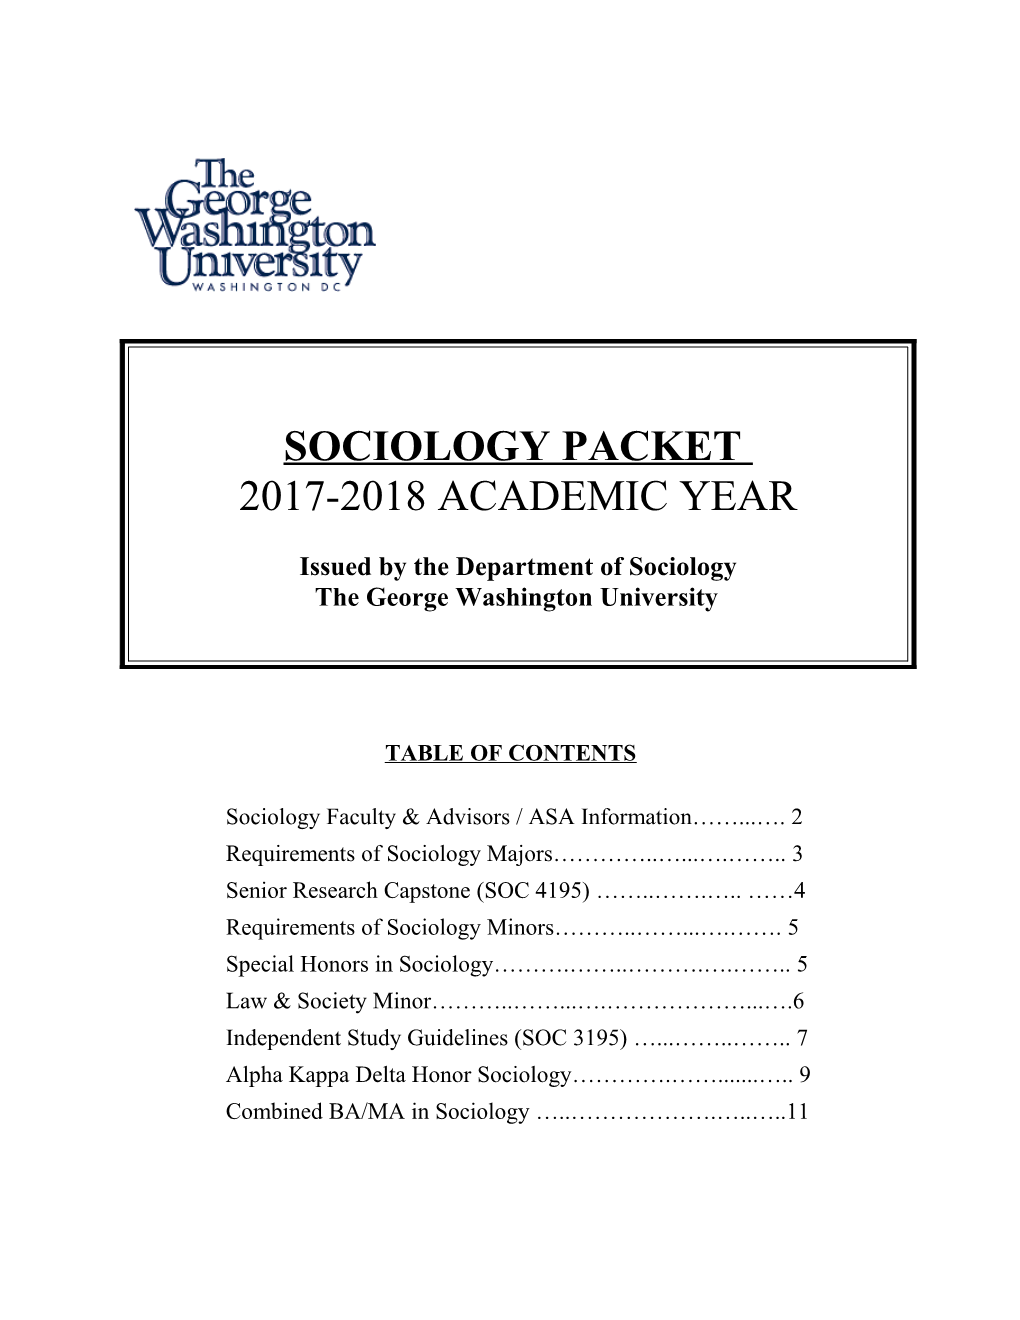 Sociology Packet for the 2006-2007 Academic Year